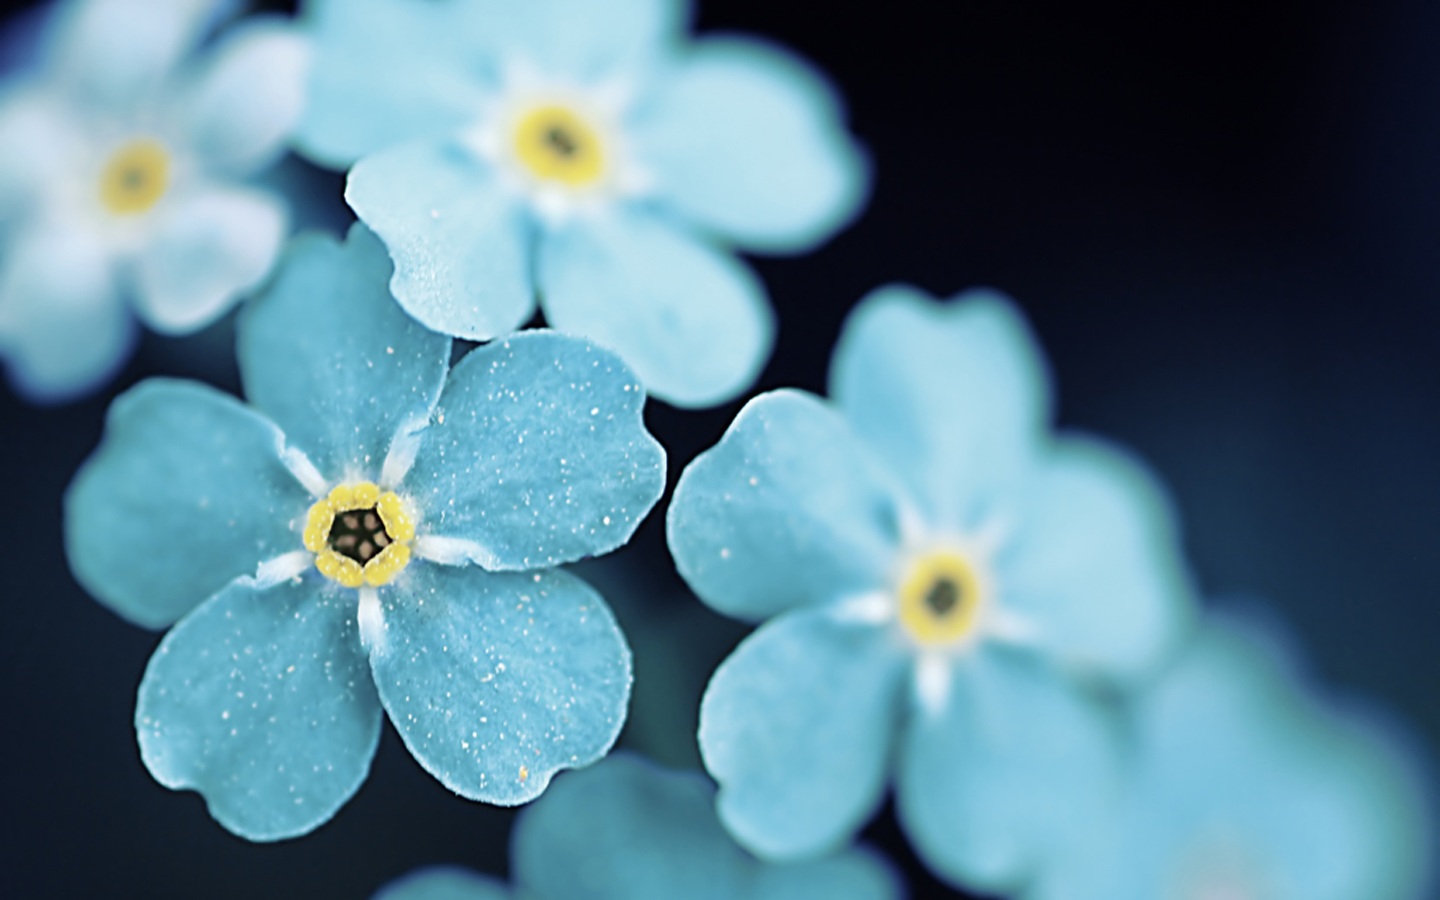 Forget-Me-Not Picture